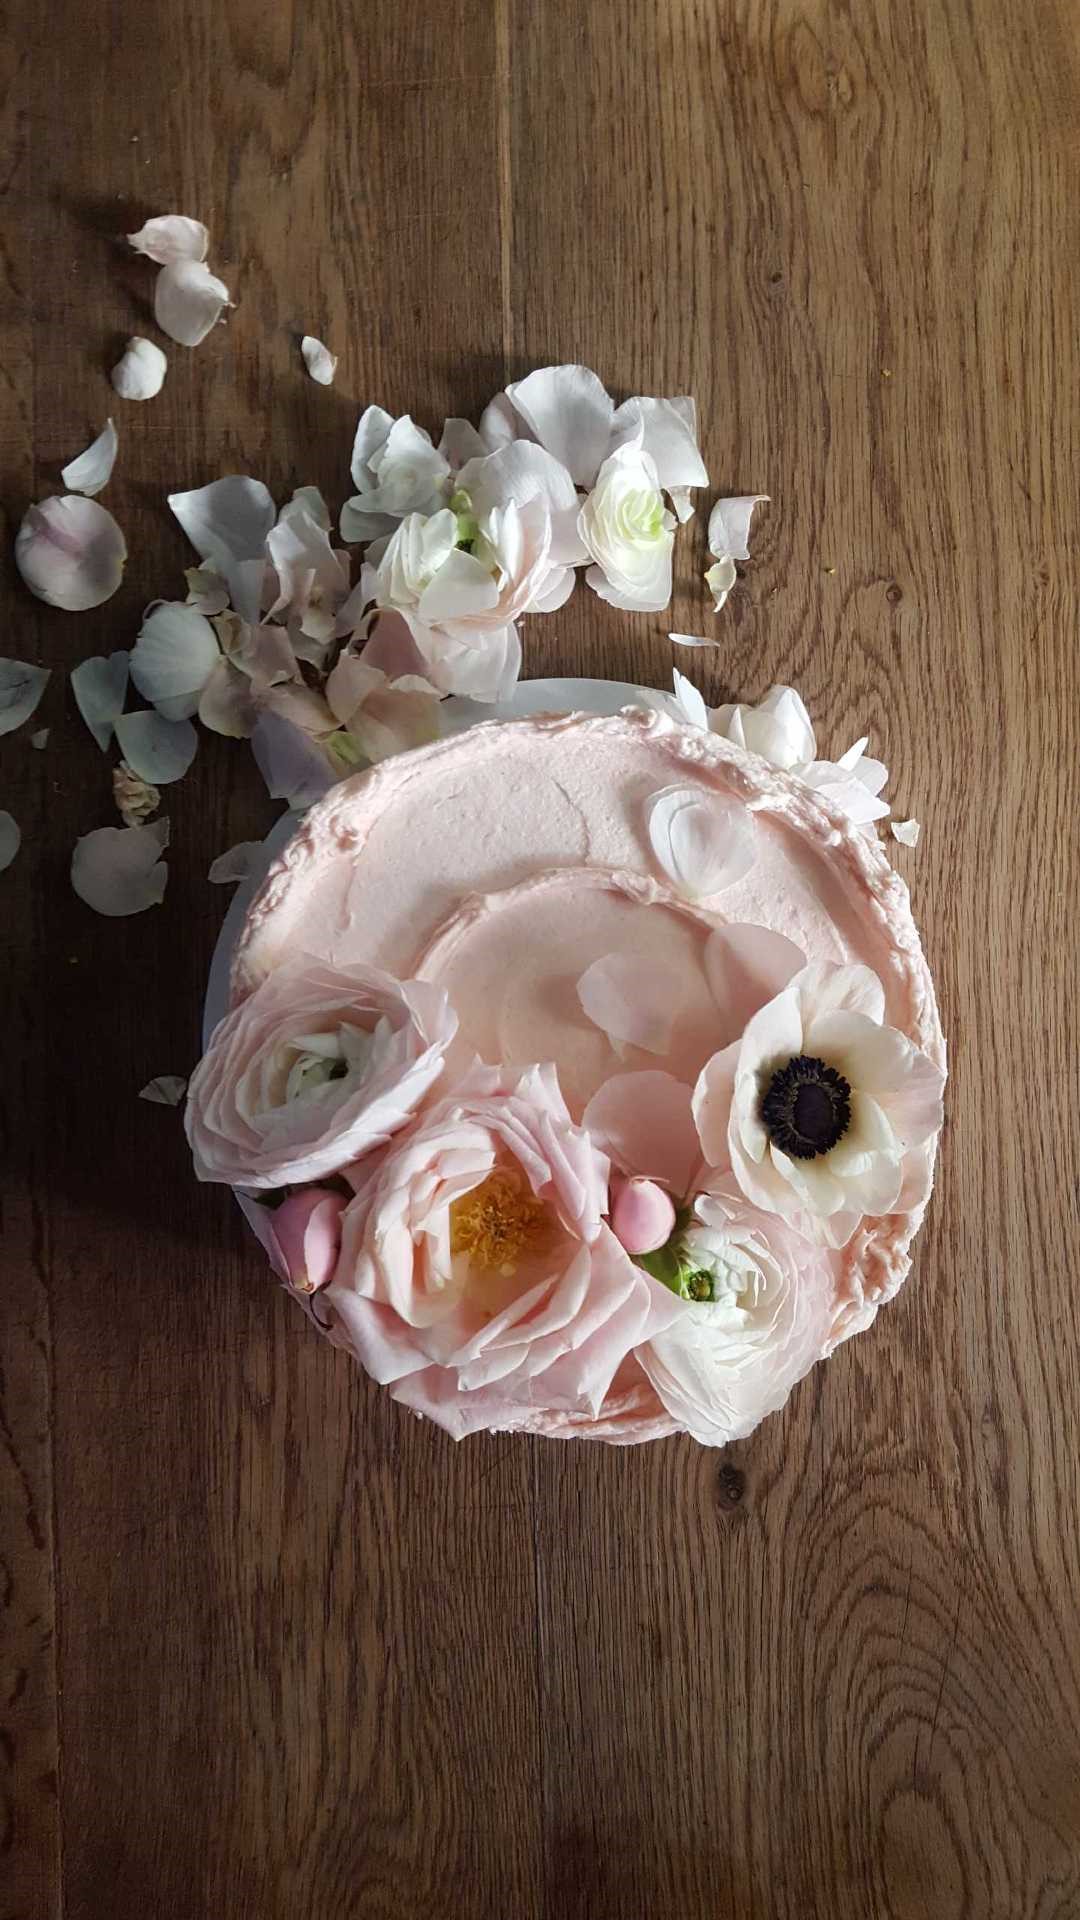 Pale pink old fashioned layer cake with fresh flowers on top. Beautiful cake styling from Violet bakery's Claire Ptak. Come see LET THEM EAT CAKE...VIOLET CAKES. #cakelover #violetbakery #violetcakes #claireptak #shabbychic #cakedecorating #letthemeatcake #bakingideas #bakingideas #cakestyling #cakequotes